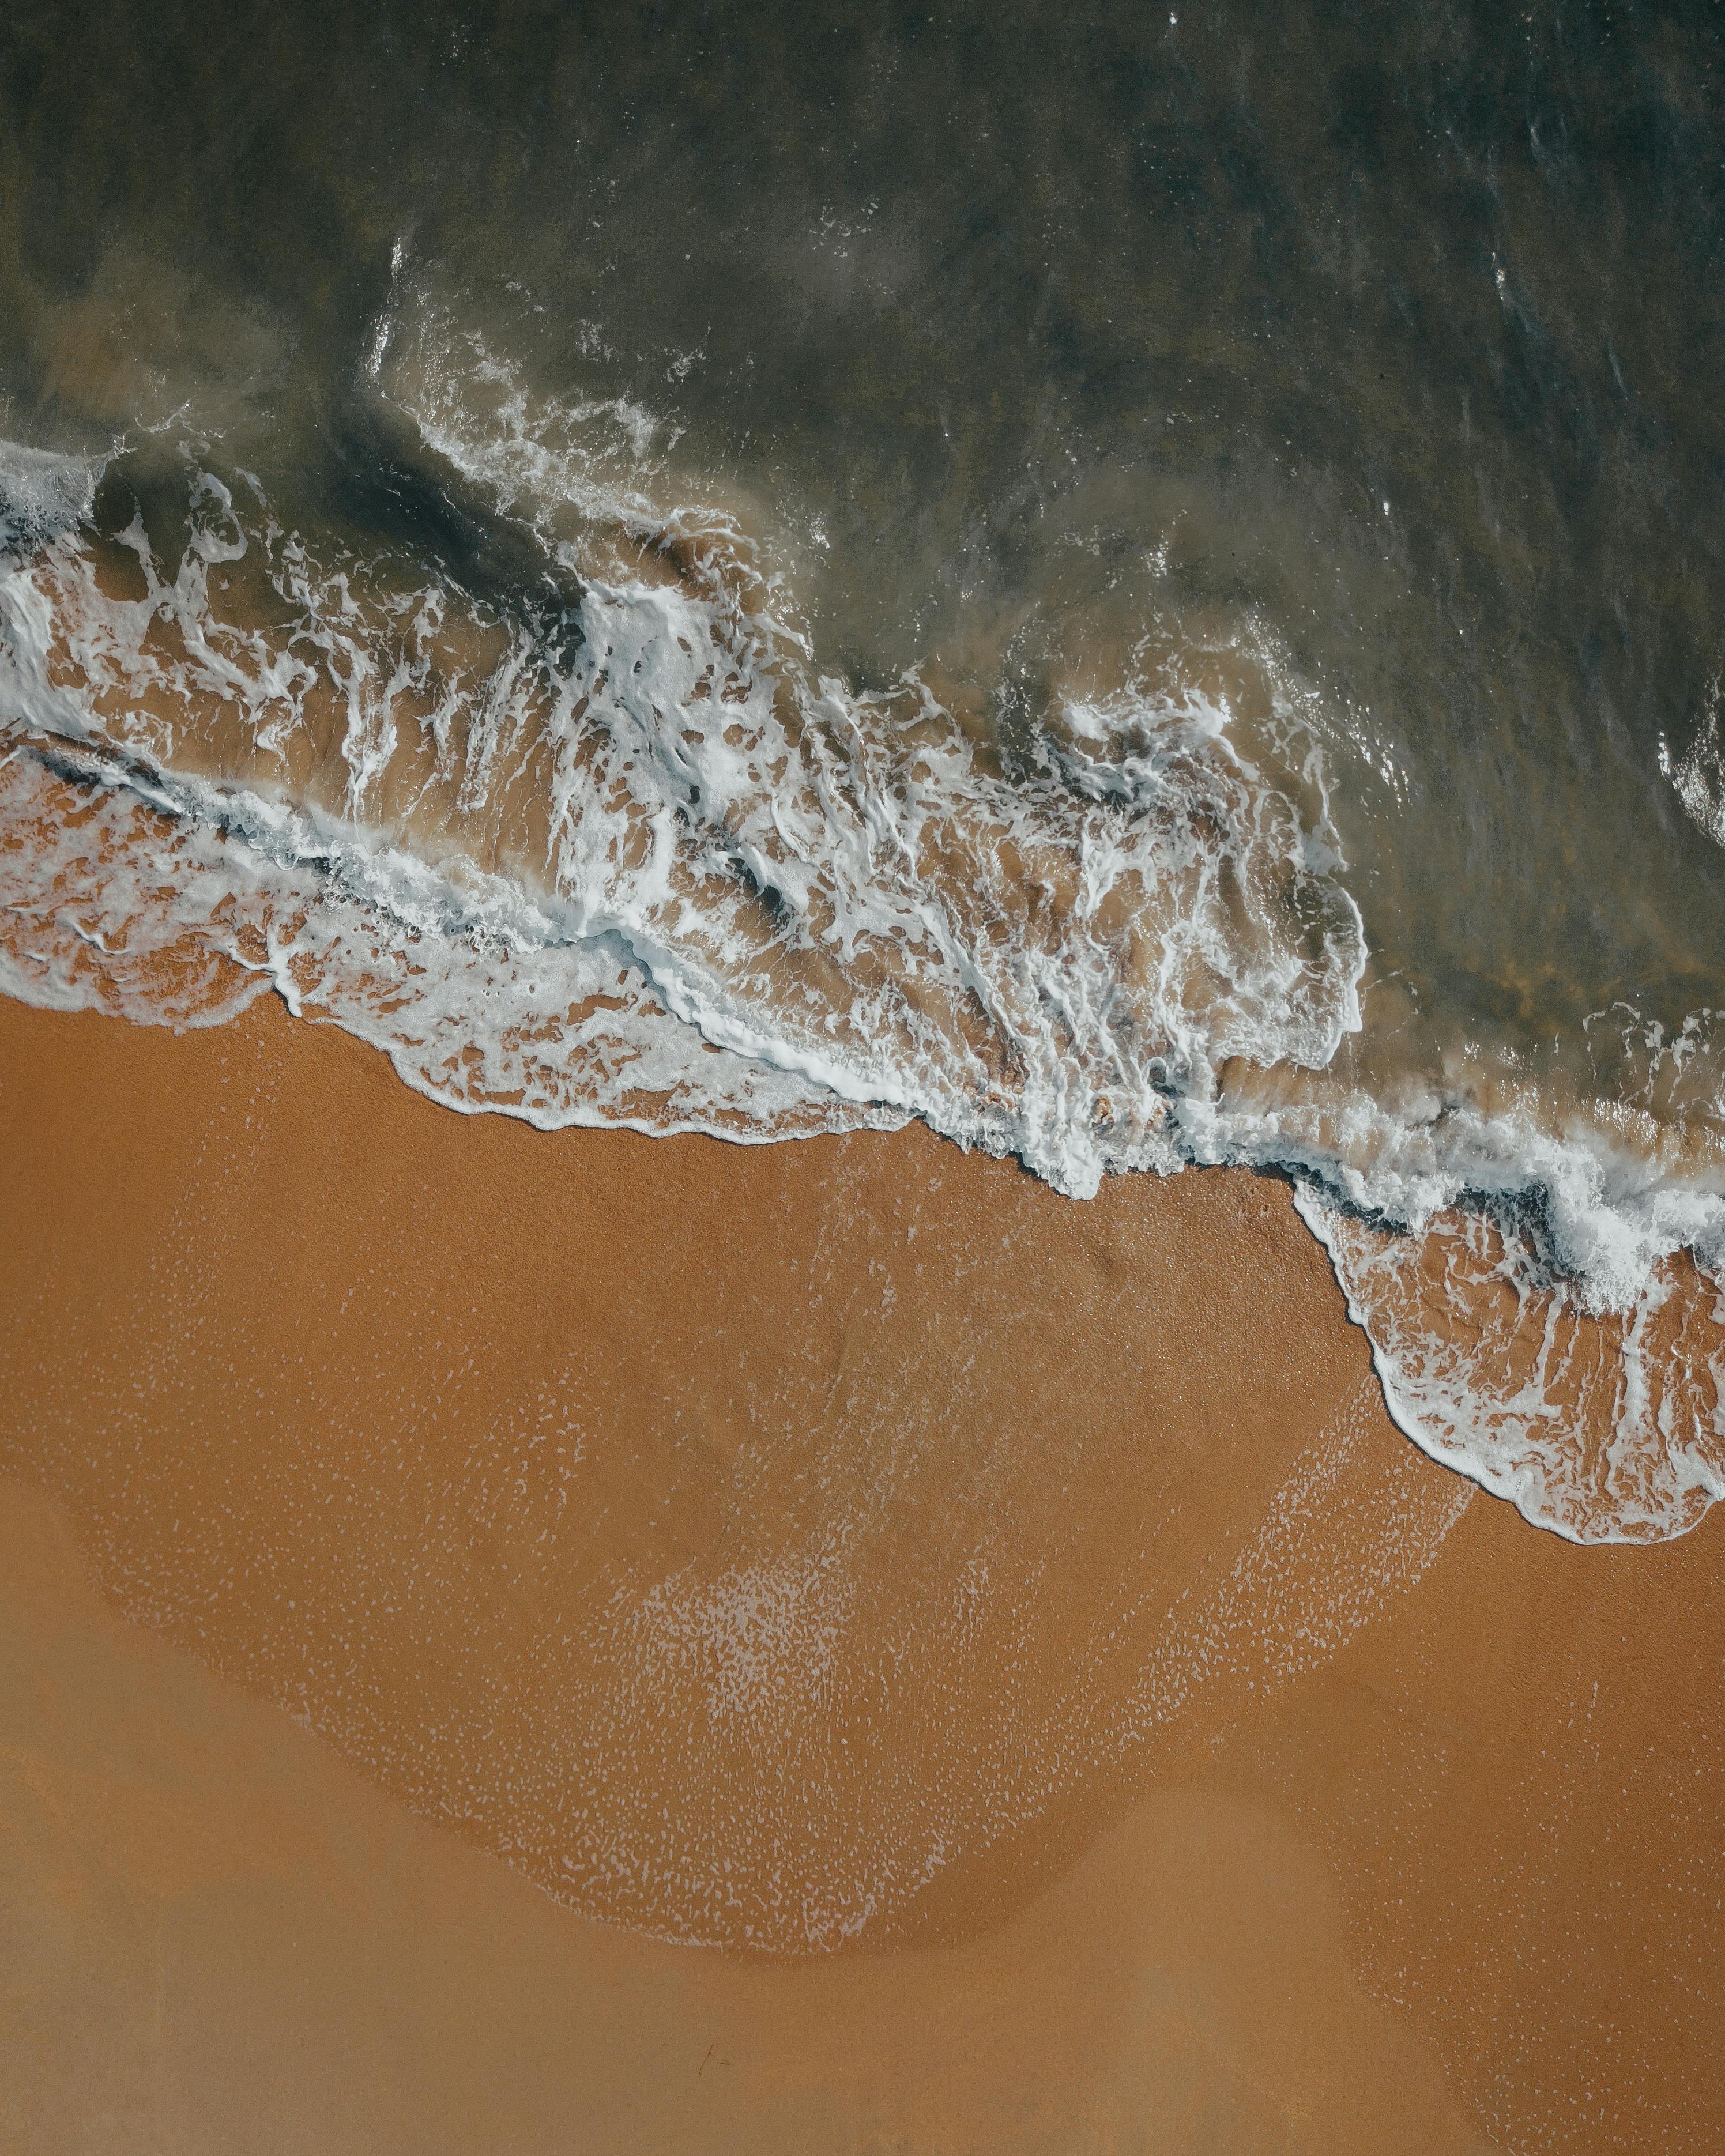 Browse Free HD Images of Ocean Water On Beach Sand